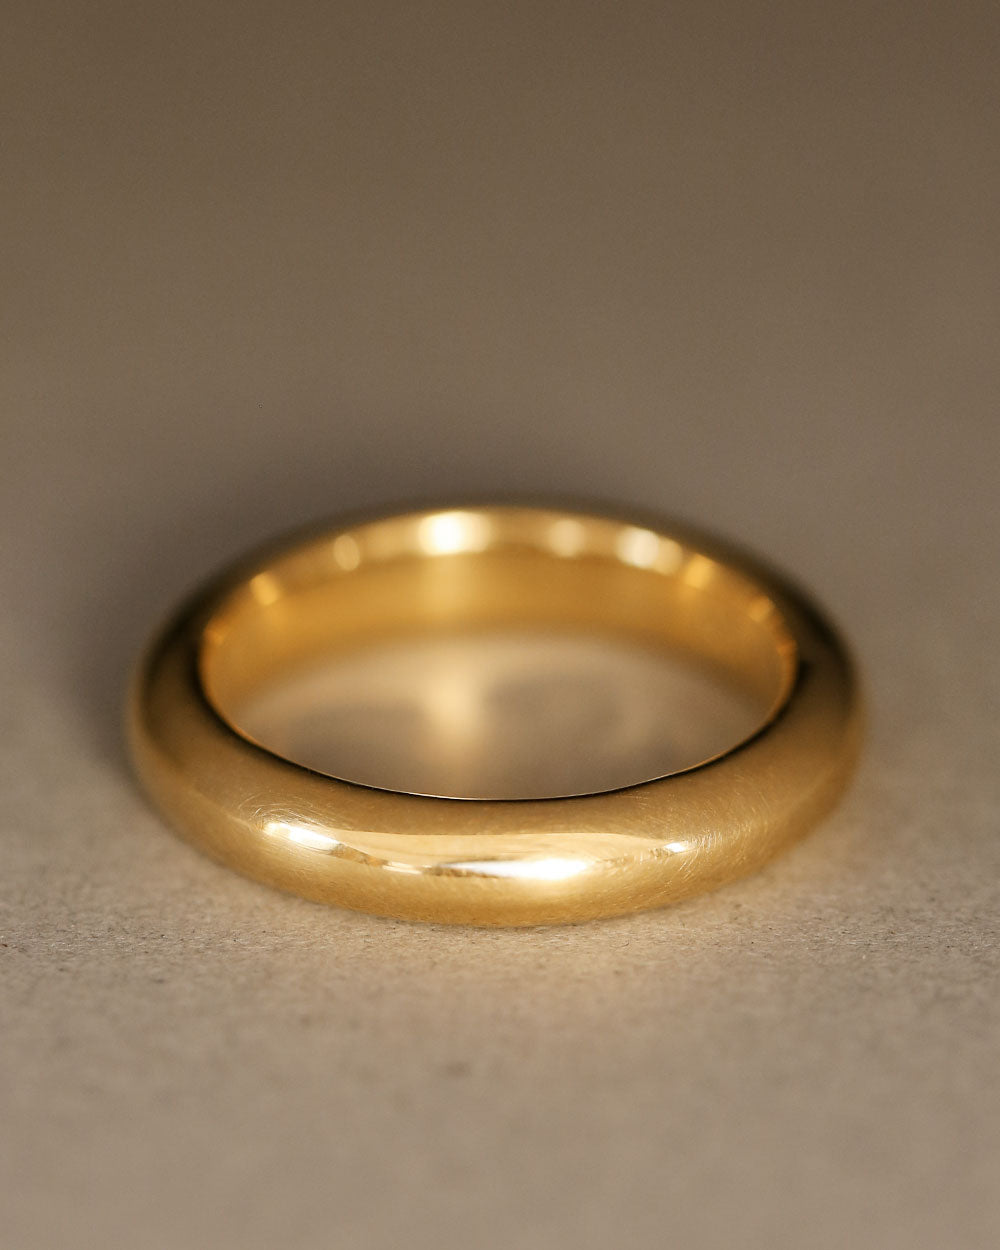 Round donut-shaped solid 18k yellow gold wedding band on gray paper. Dominus Band by George Rings.